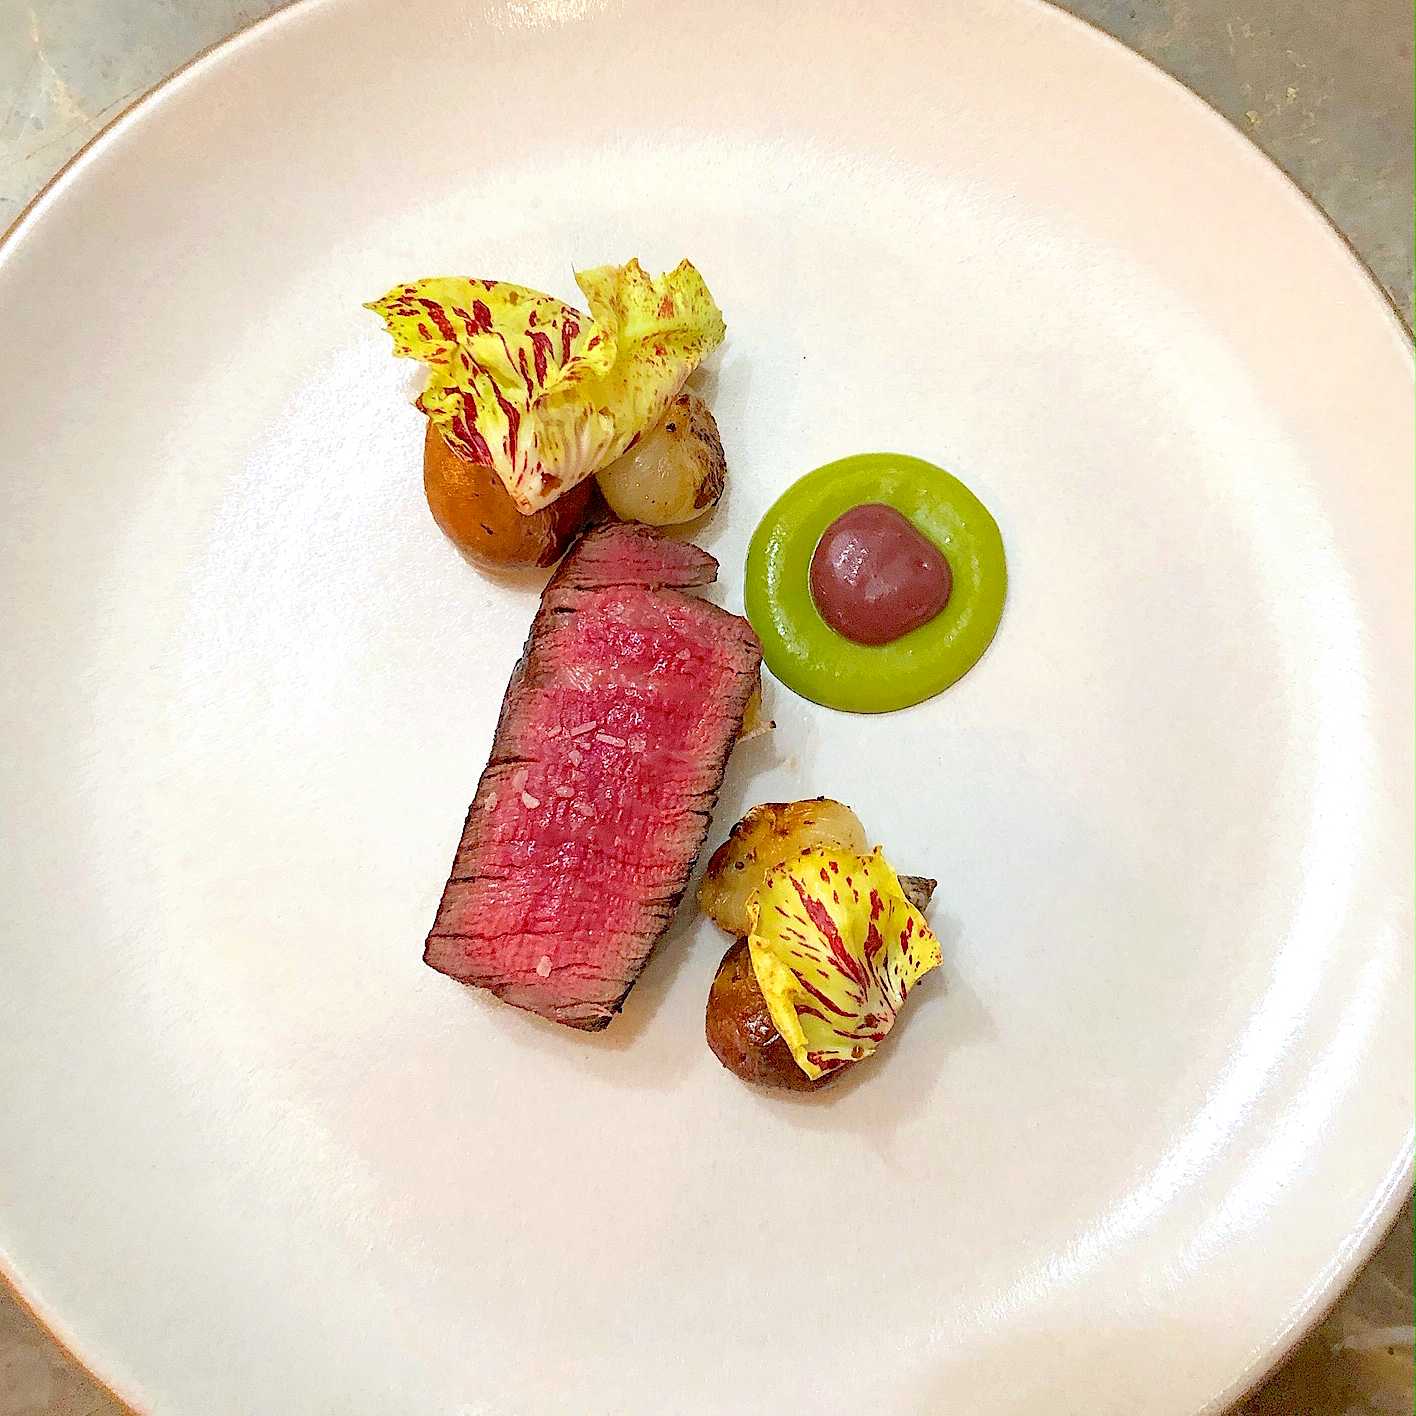 Beef tenderloin recipe with Olive and potato